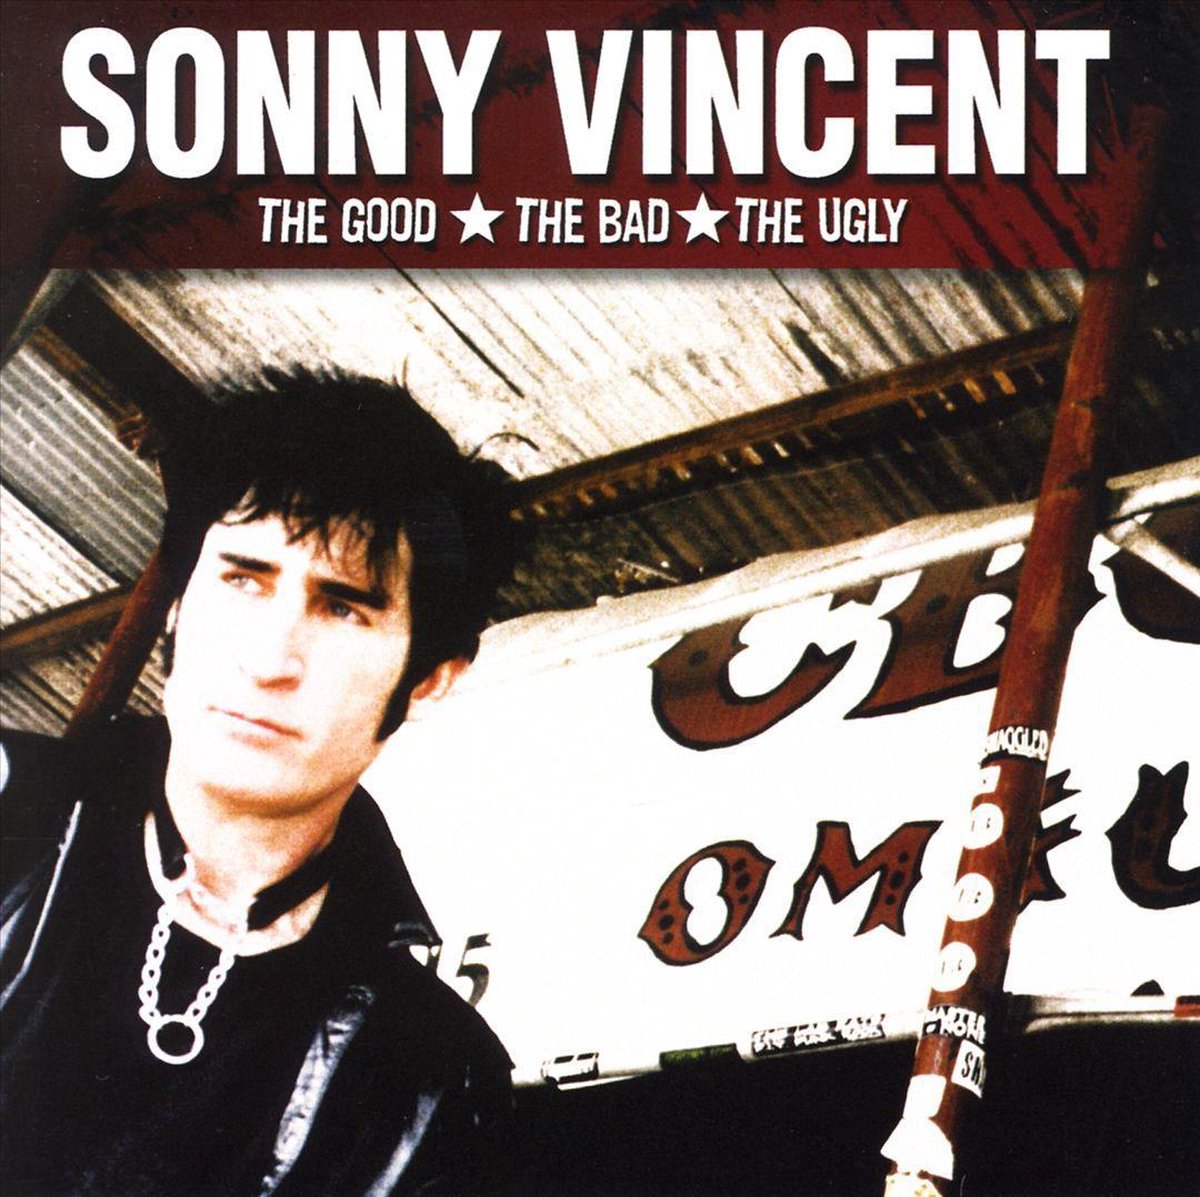 Good, the Bad and the Ugly - Sonny Vincent